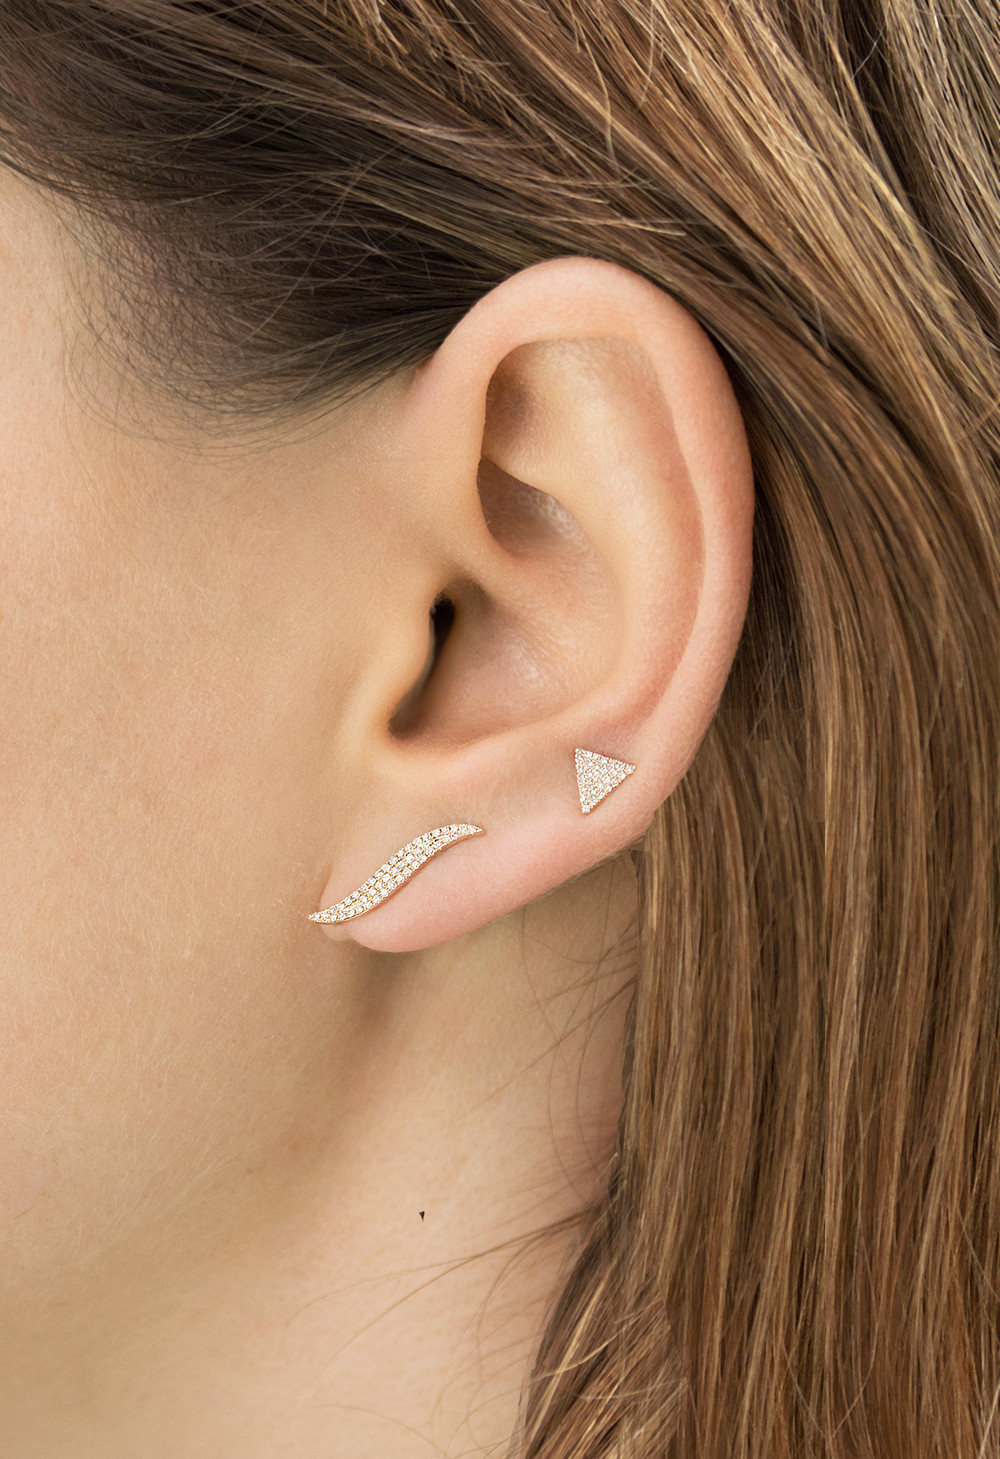 Ear Climber Earrings
 Ear Climbers The Edgy Trend We’re Embracing For 2015